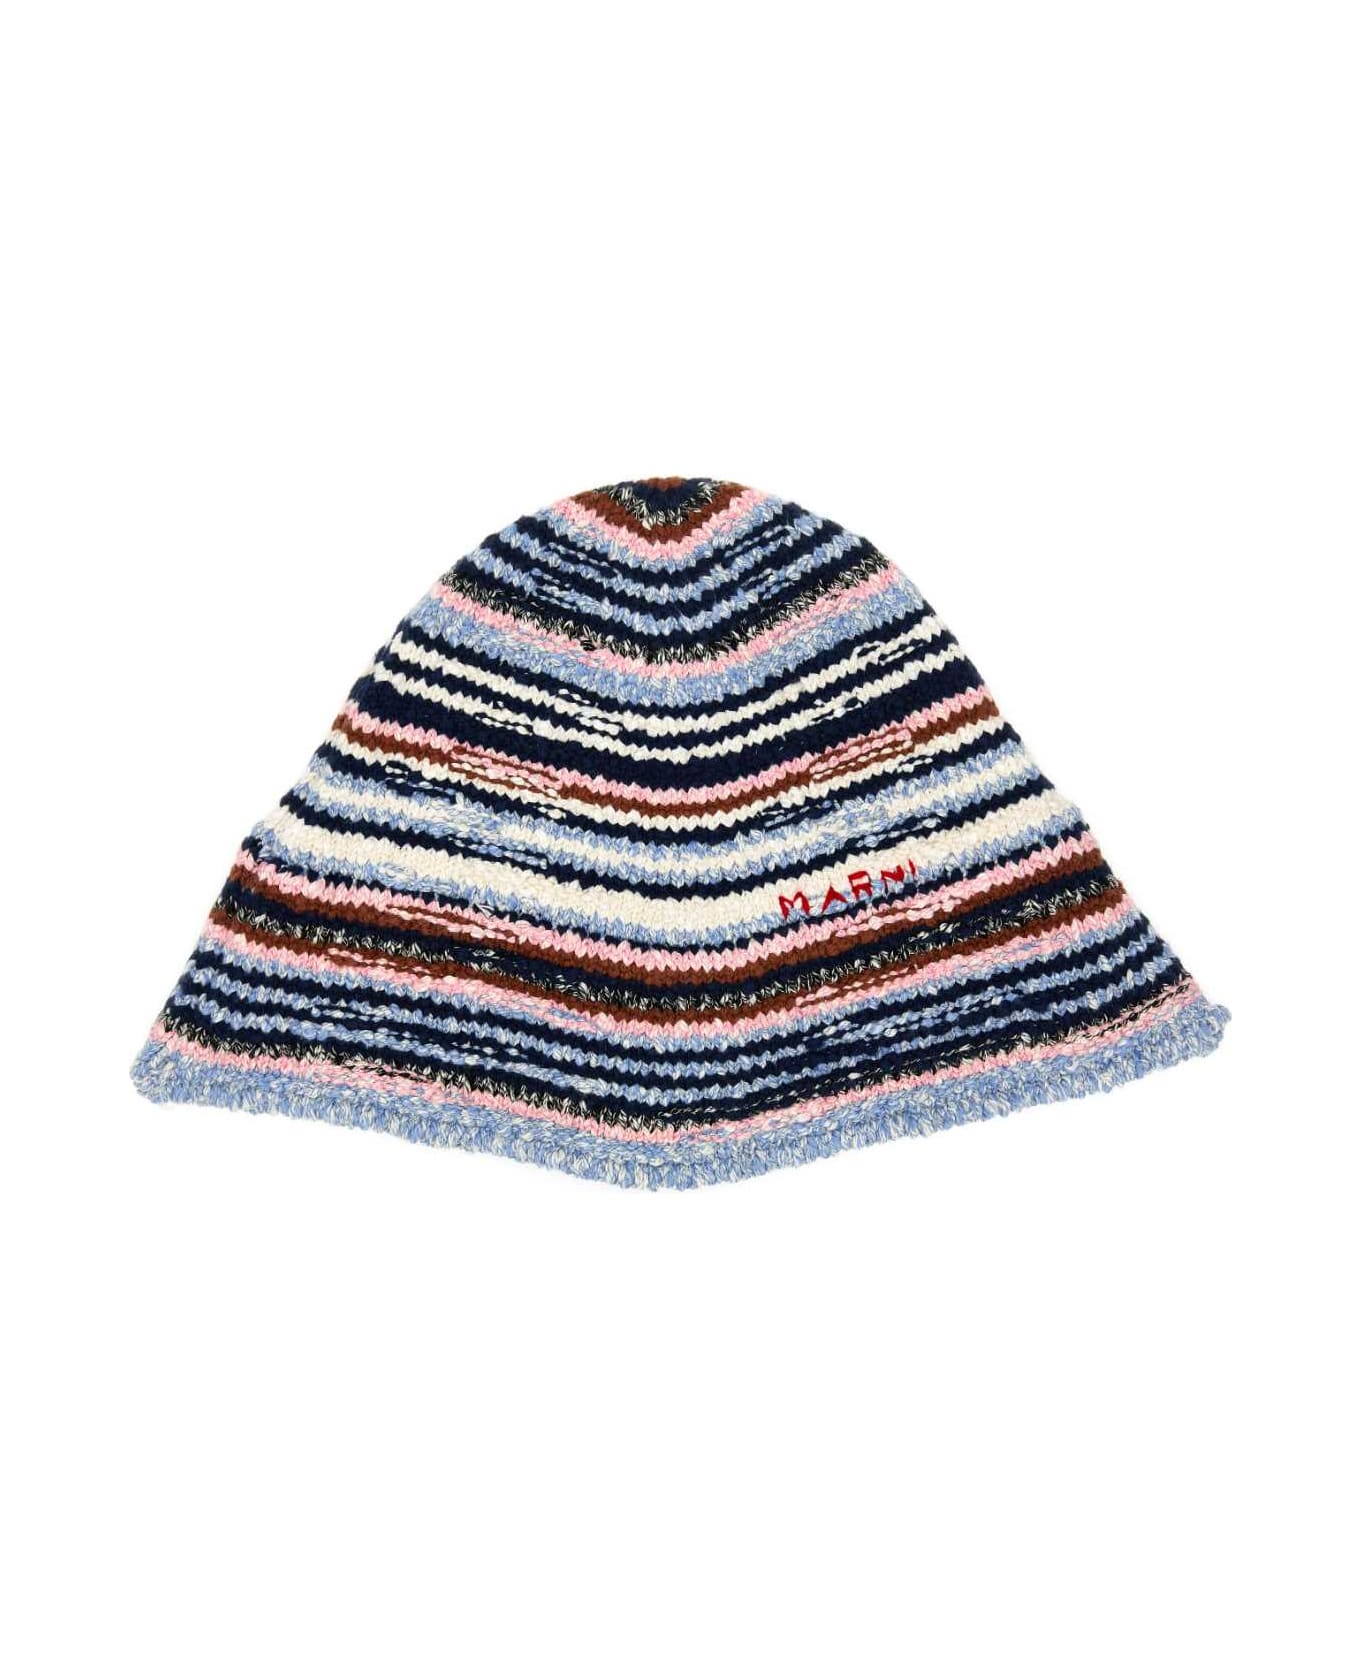 Marni Embroidered Cotton Bucket Hat - OPAL